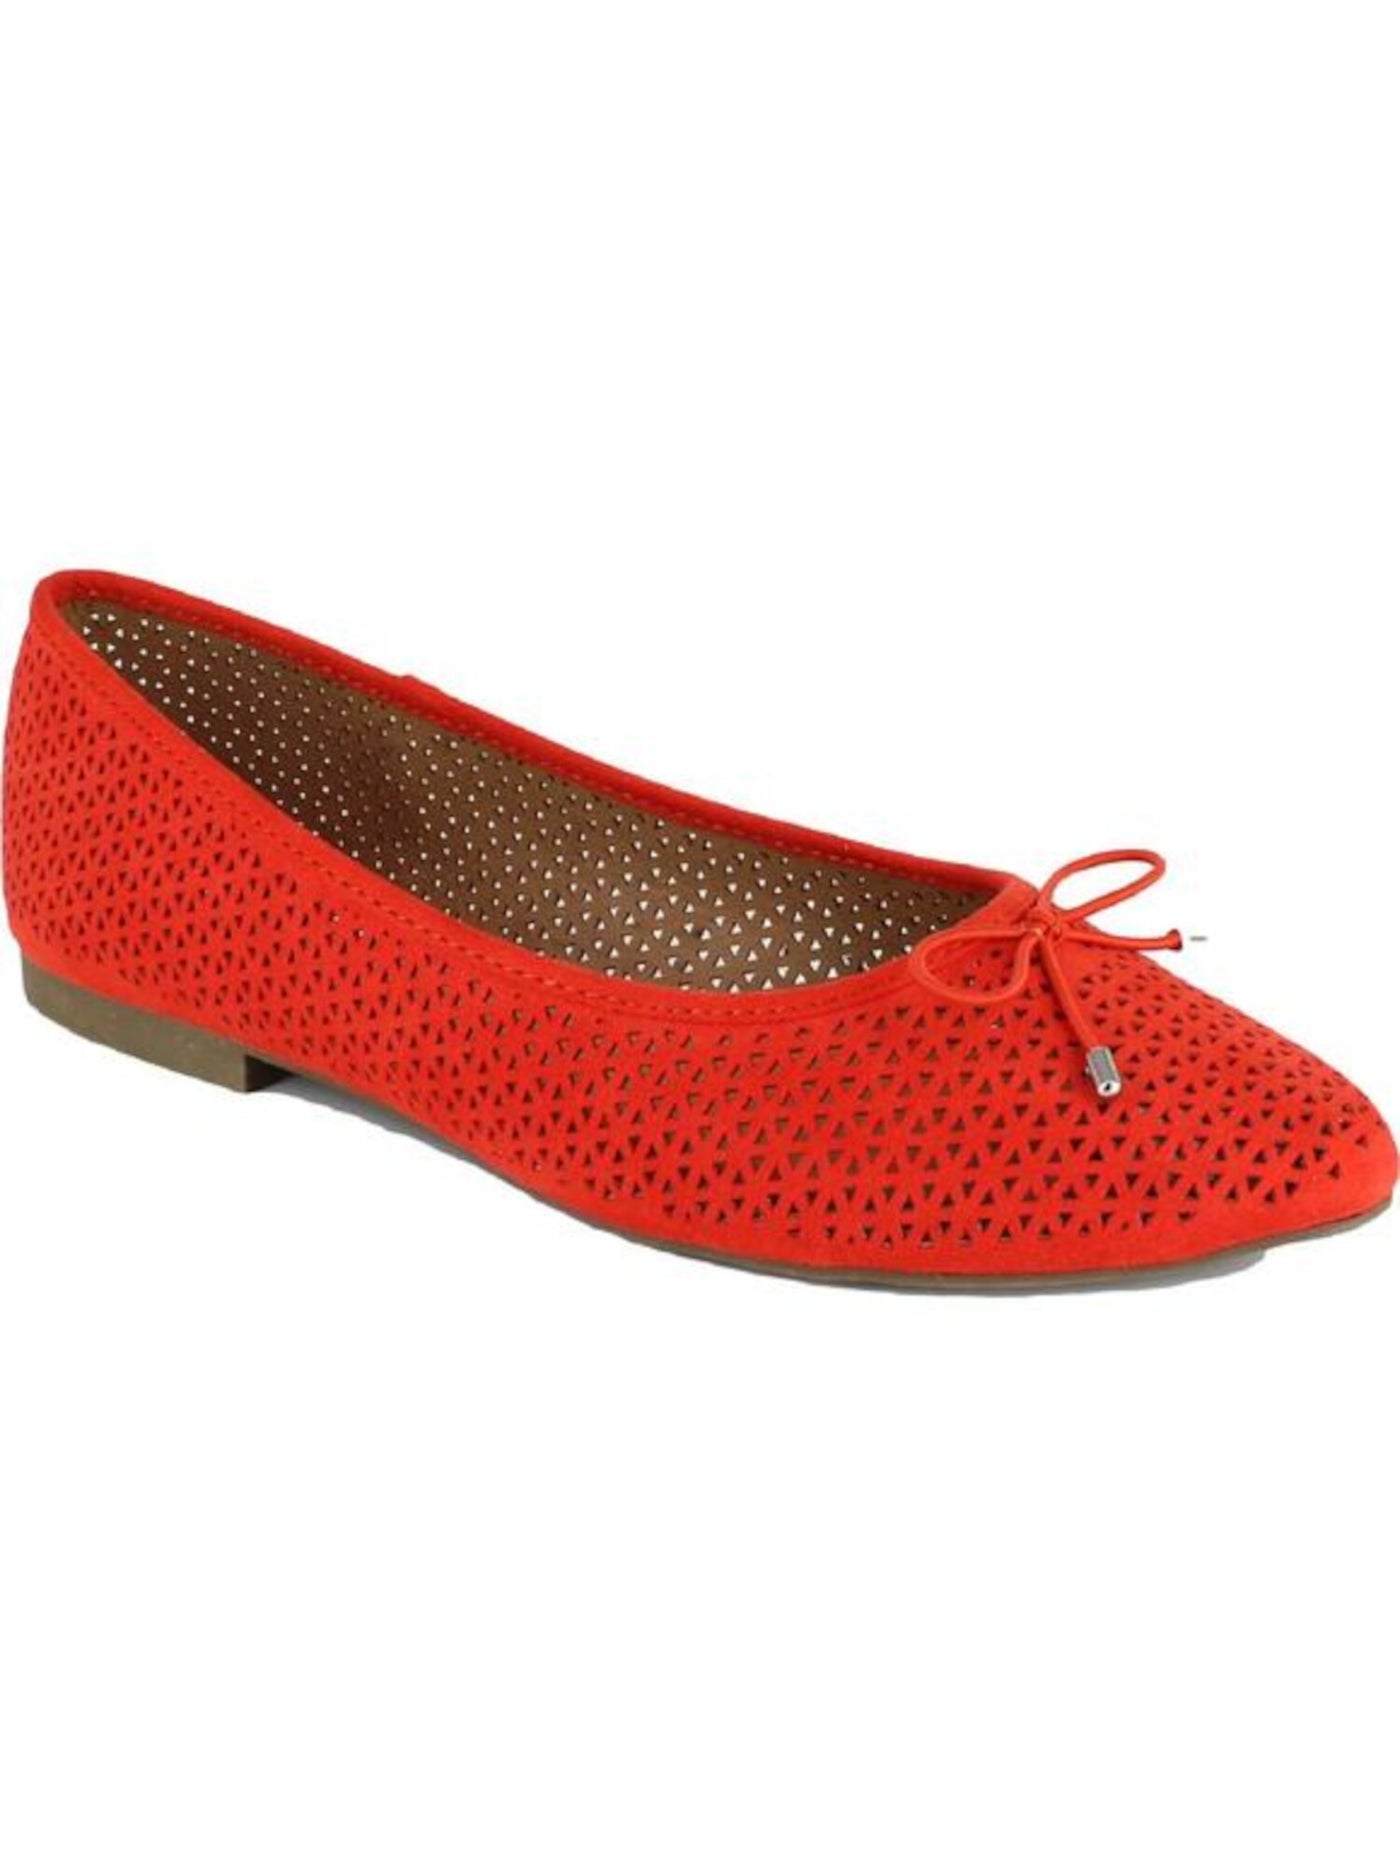 ESPRIT Womens Red Bow Accent Perforated Patti Almond Toe Slip On Flats Shoes 6